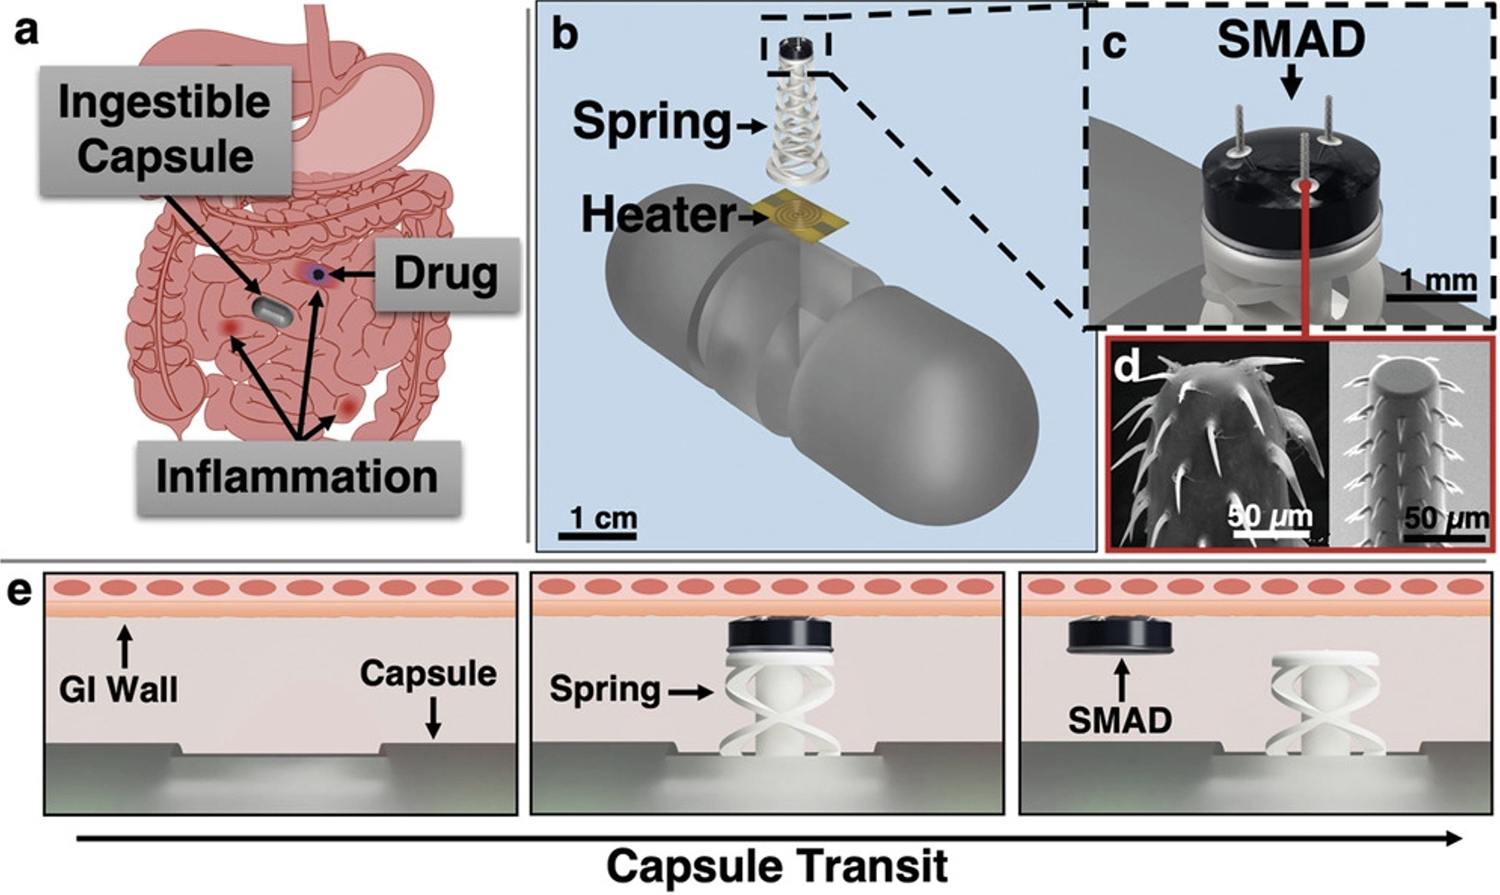 Ingestible capsule actuation and SMAD delivery principle